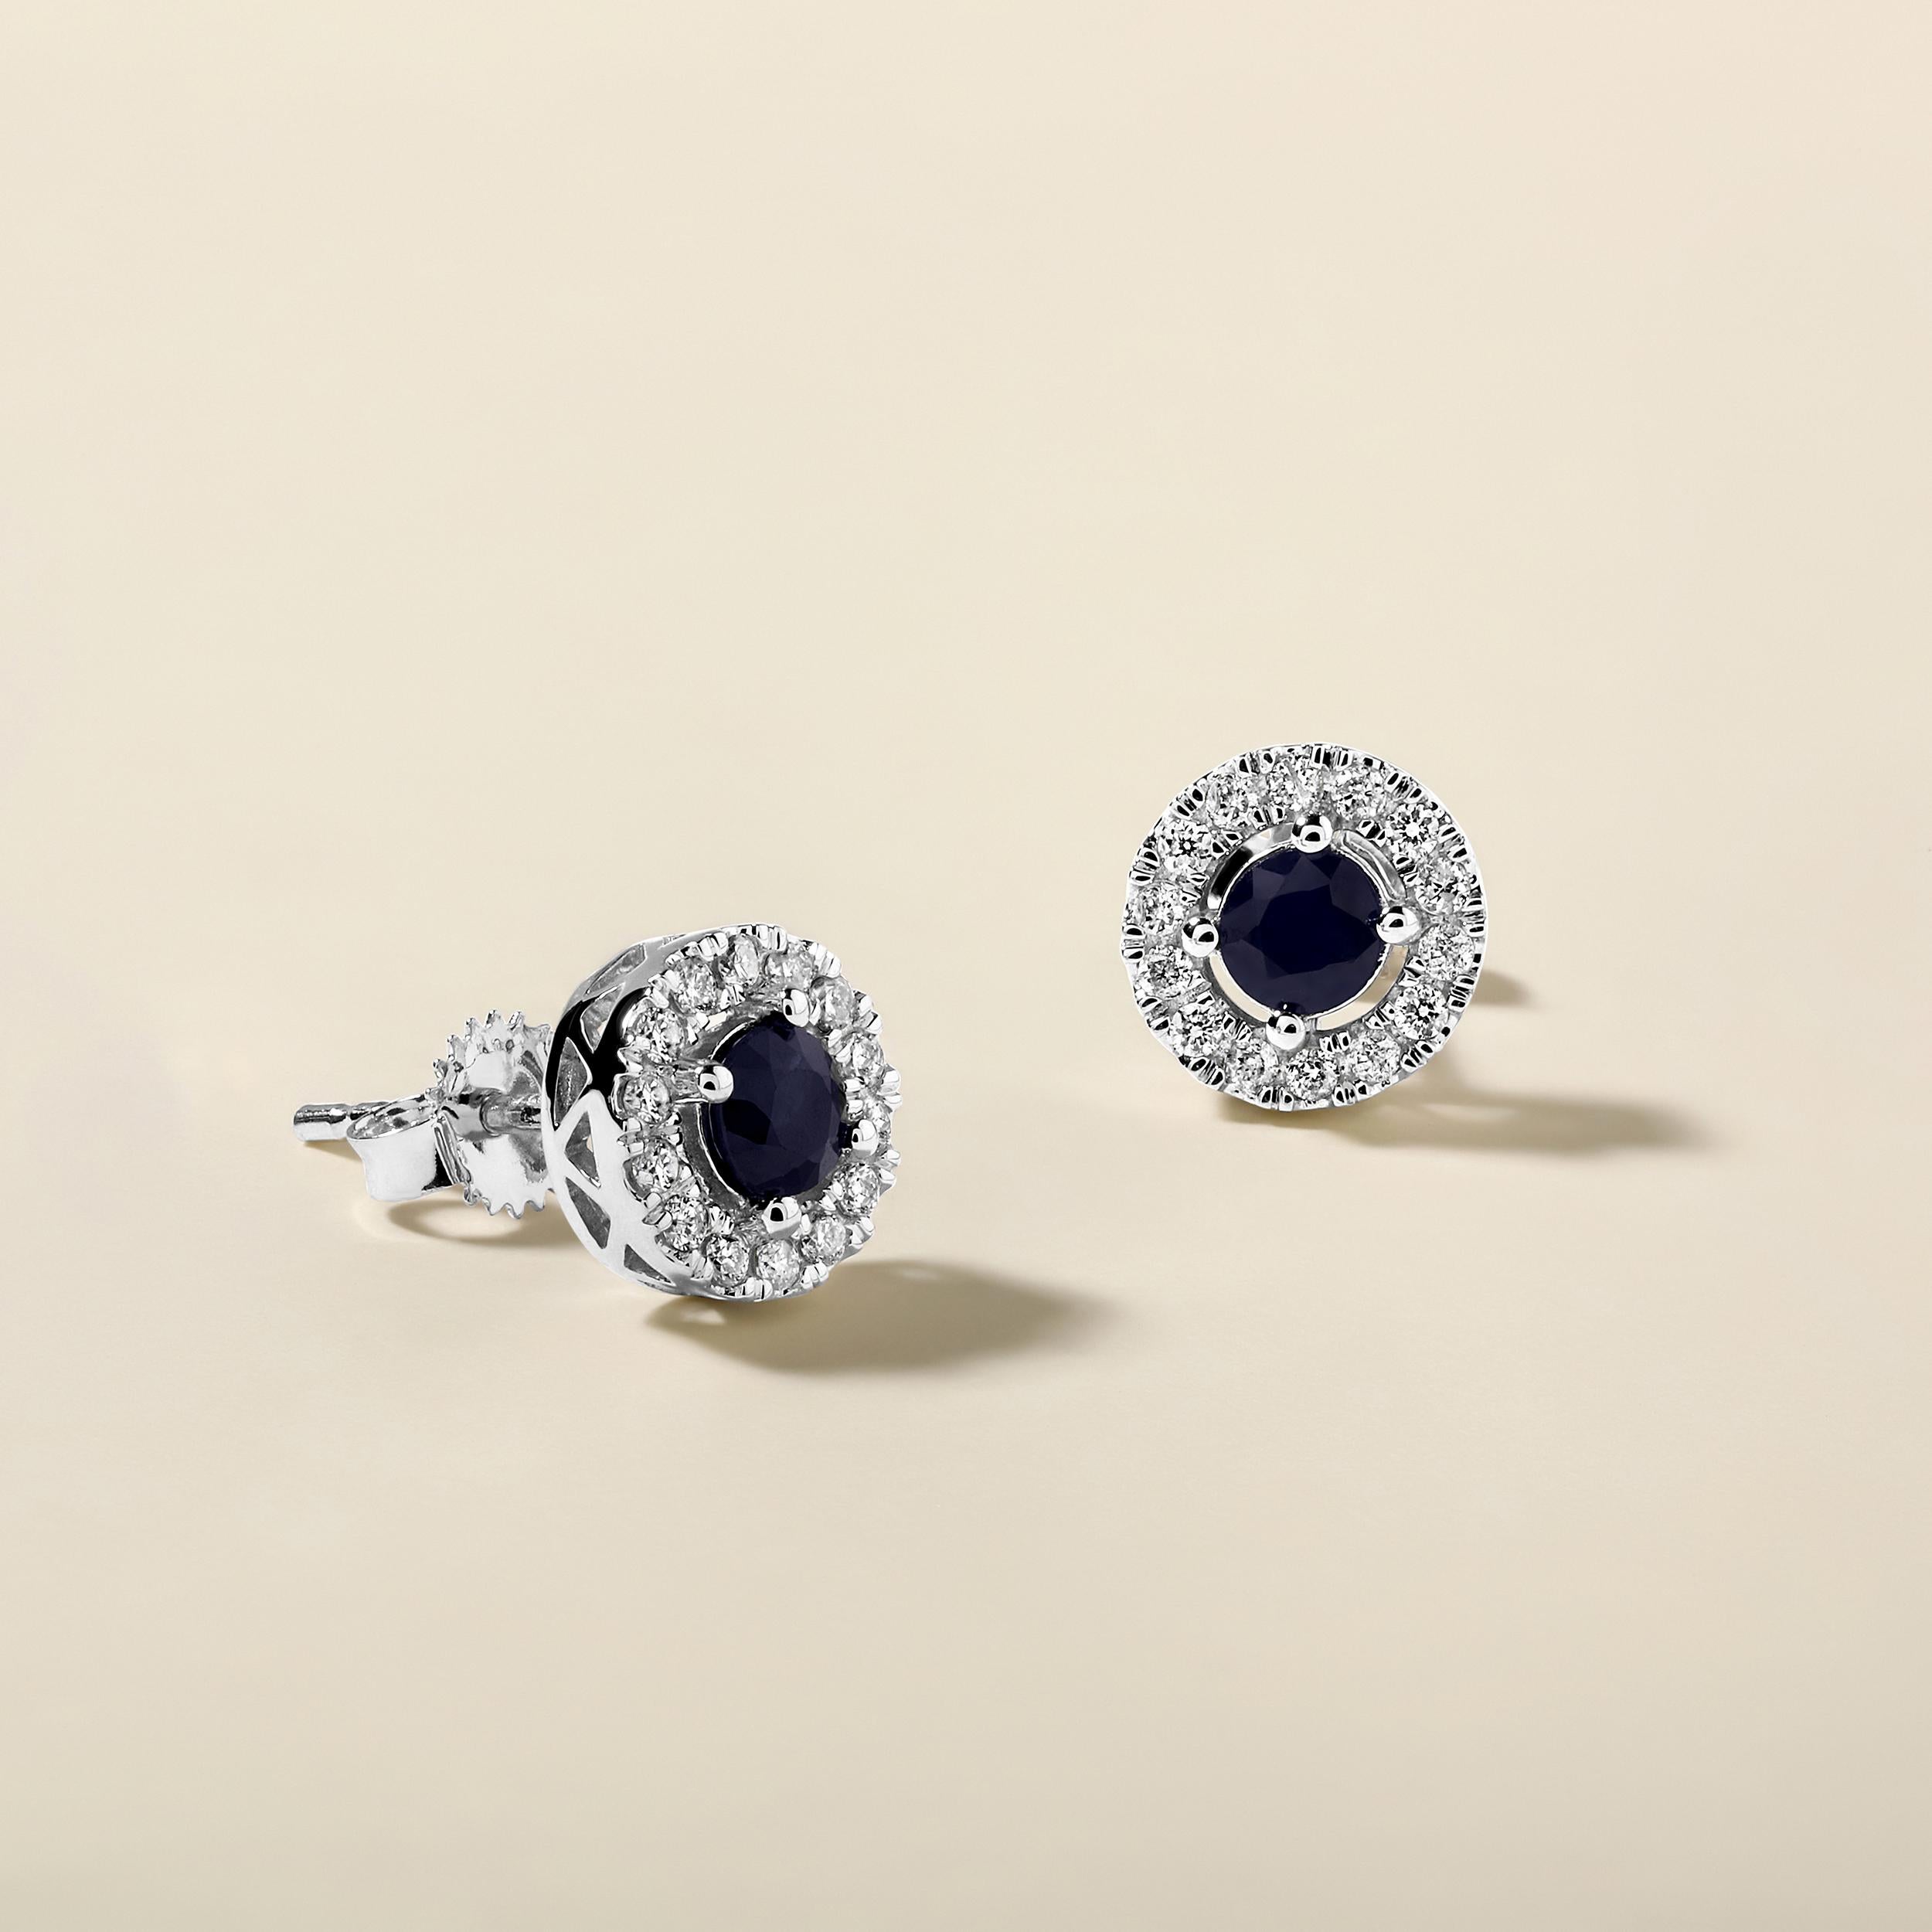 Crafted in 3.02 grams of 14K White Gold, the earrings contain 36 stones of Round Natural Diamonds with a total of 0.29 carat in F-G color and I1-I2 clarity combined with 2 stones of Round Shaped Natural Sapphire Gemstones with a total of 1.21 carat.